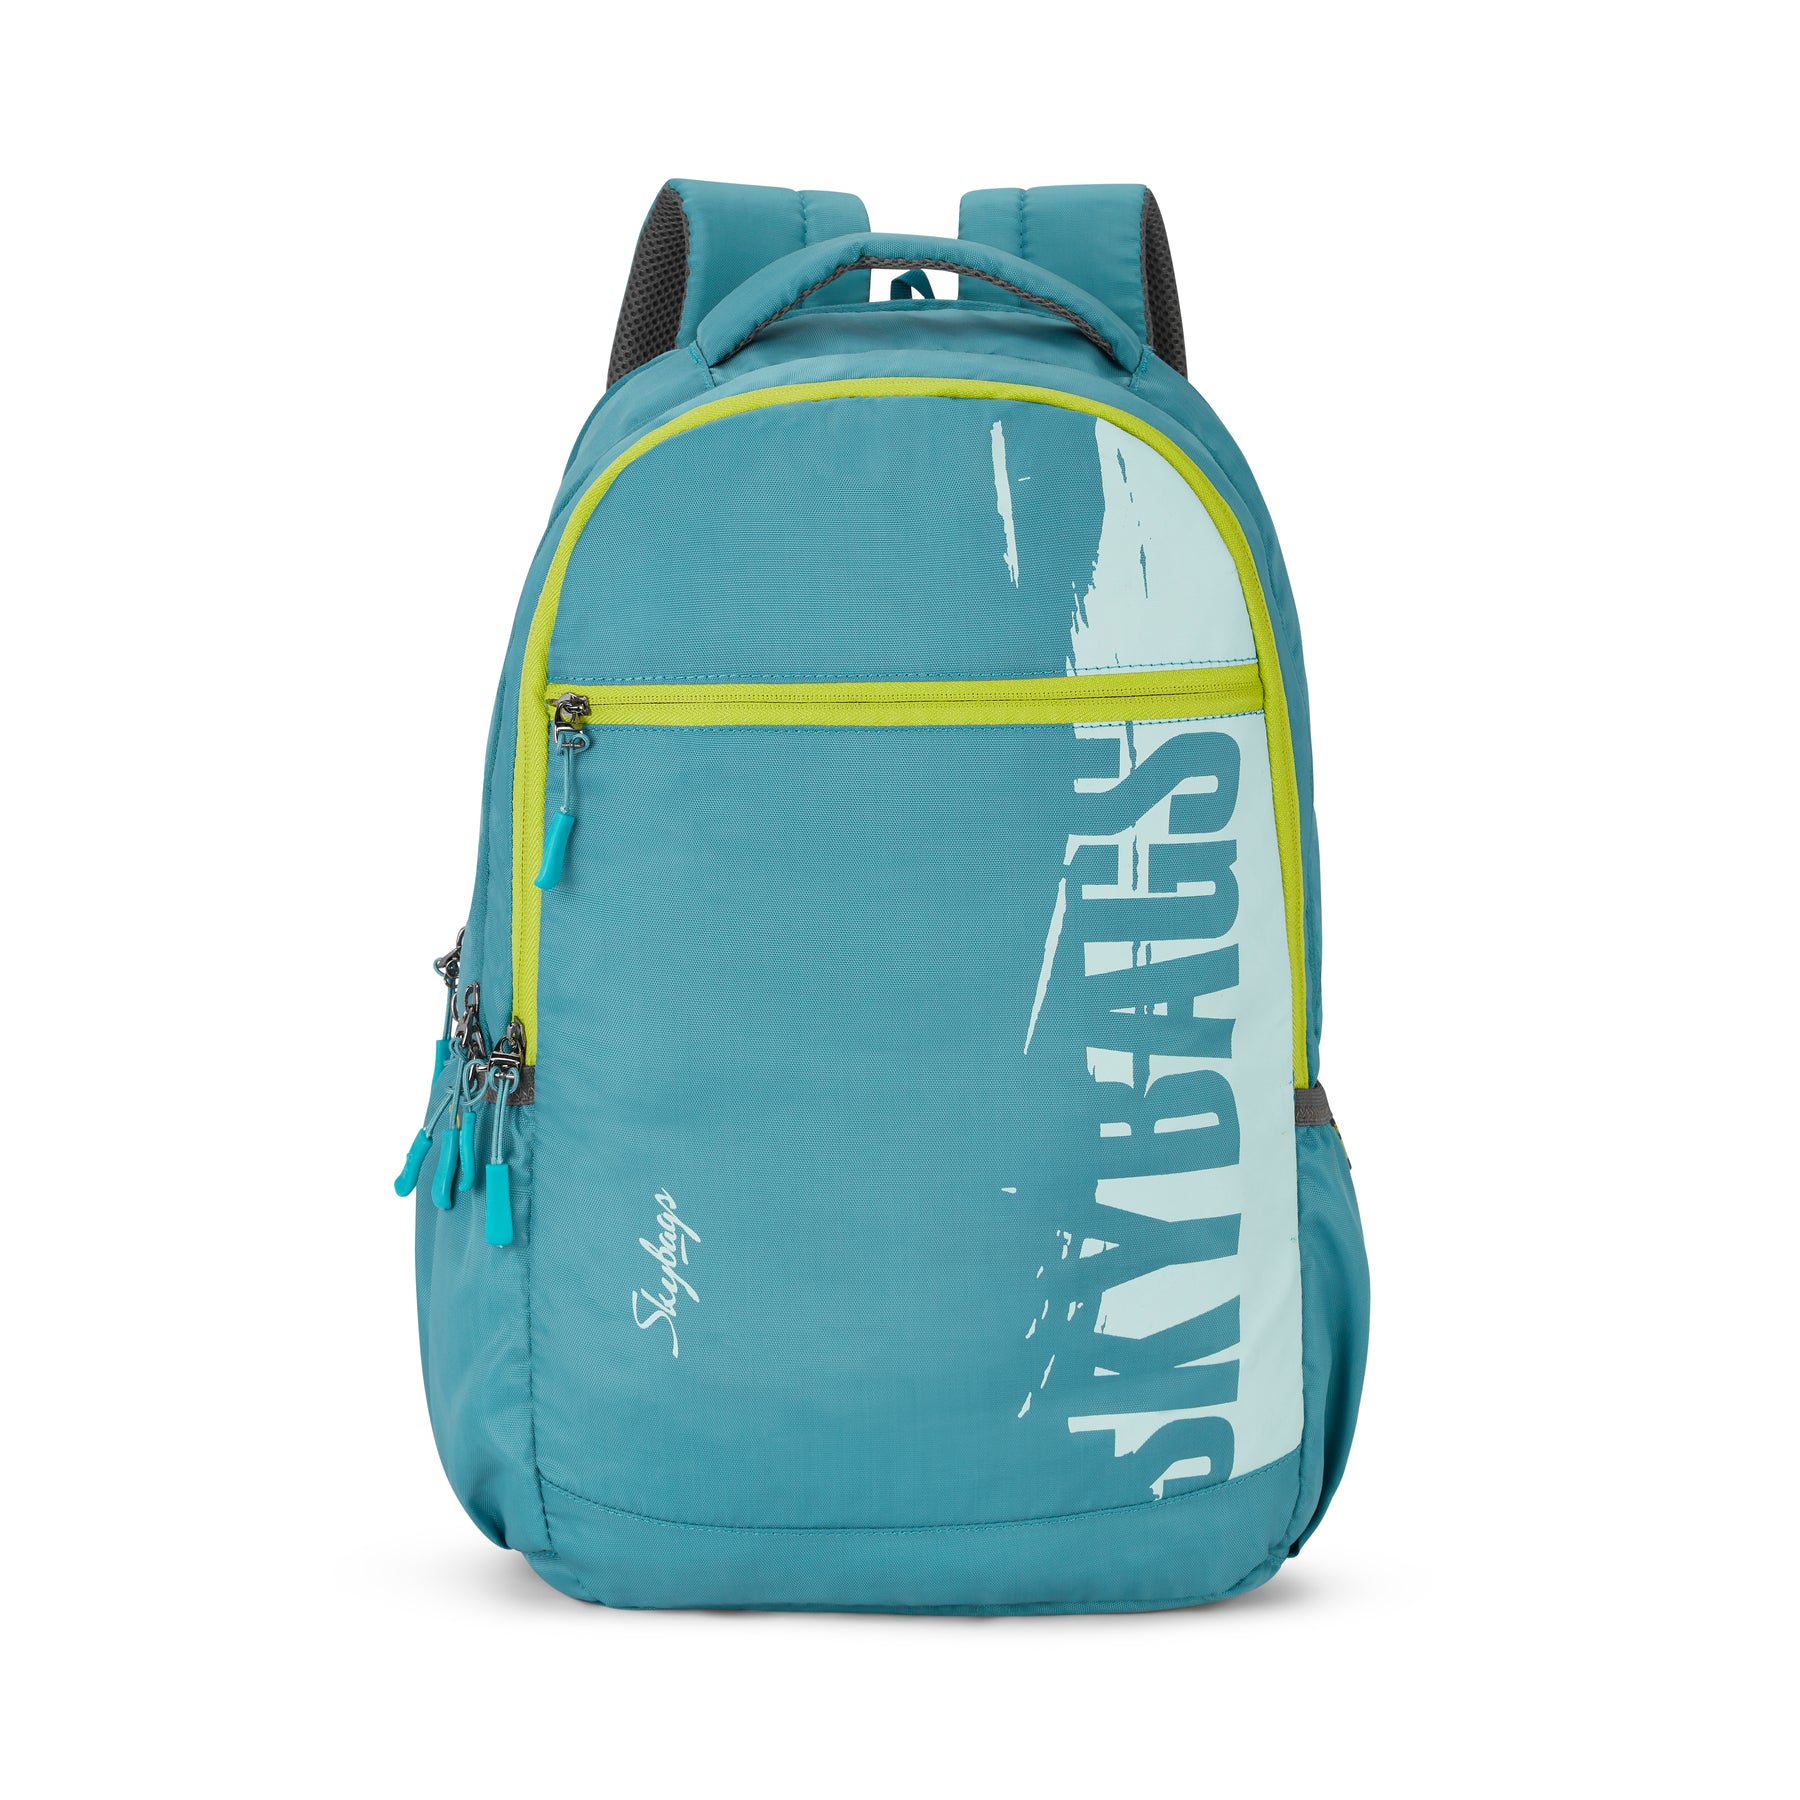 Skybags Riddle School Backpack with Rain Cover Gradient Blue Height 20  Inches Online in India, Buy at Best Price from Firstcry.com - 13119505